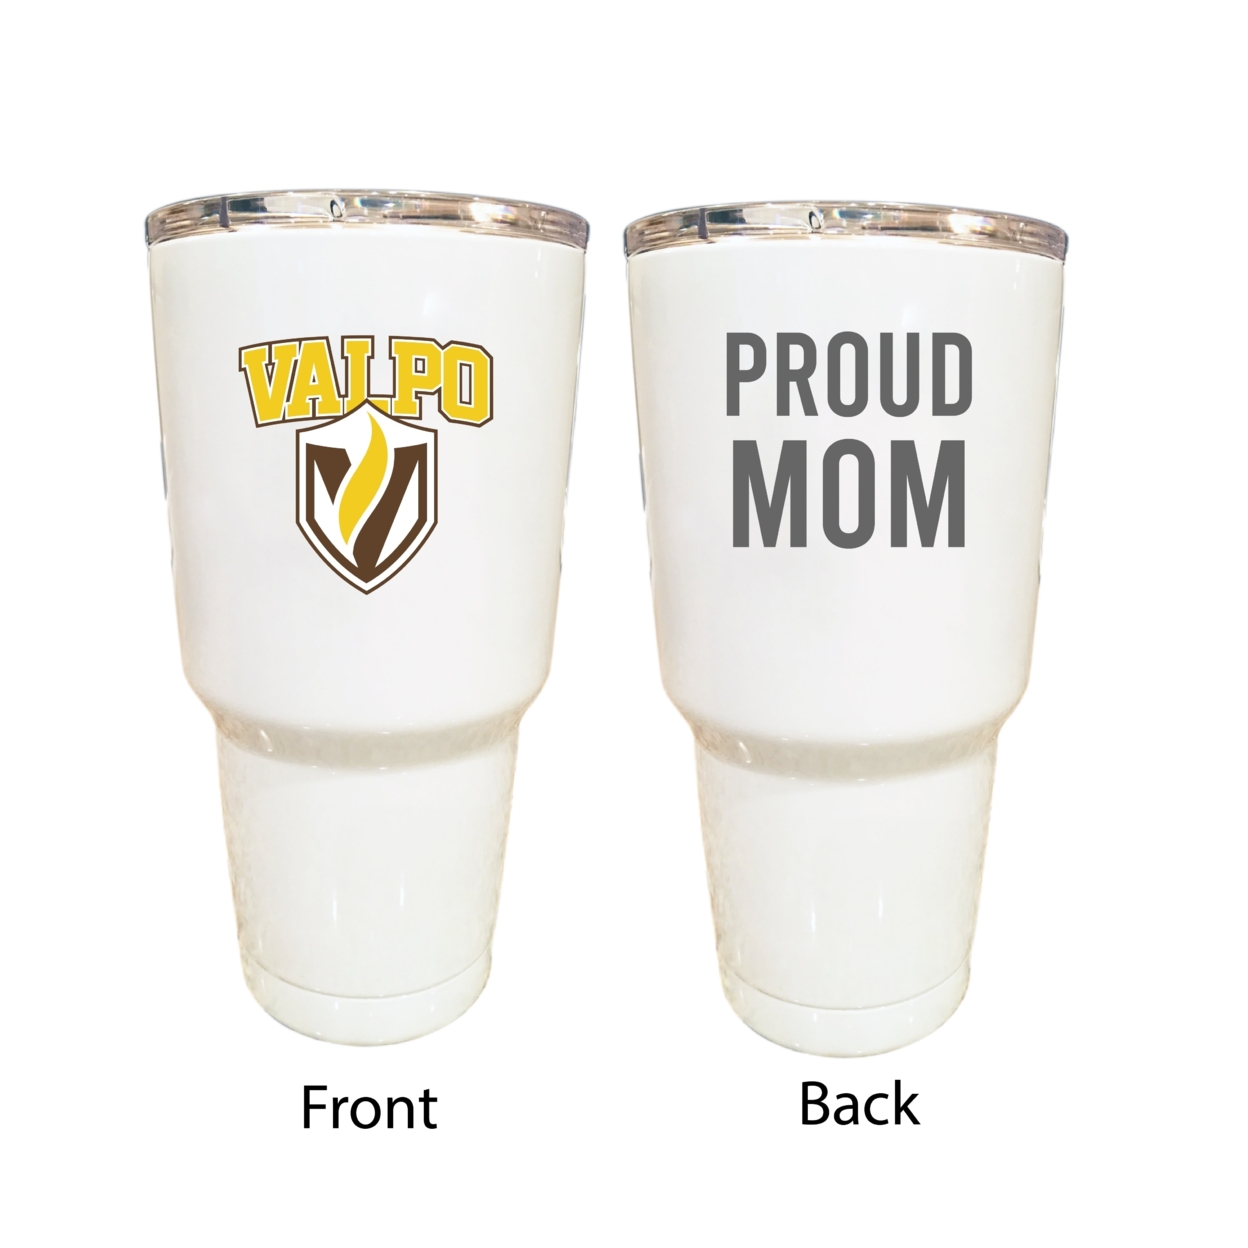 Valparaiso University Proud Mom 24 Oz Insulated Stainless Steel Tumblers Choose Your Color.